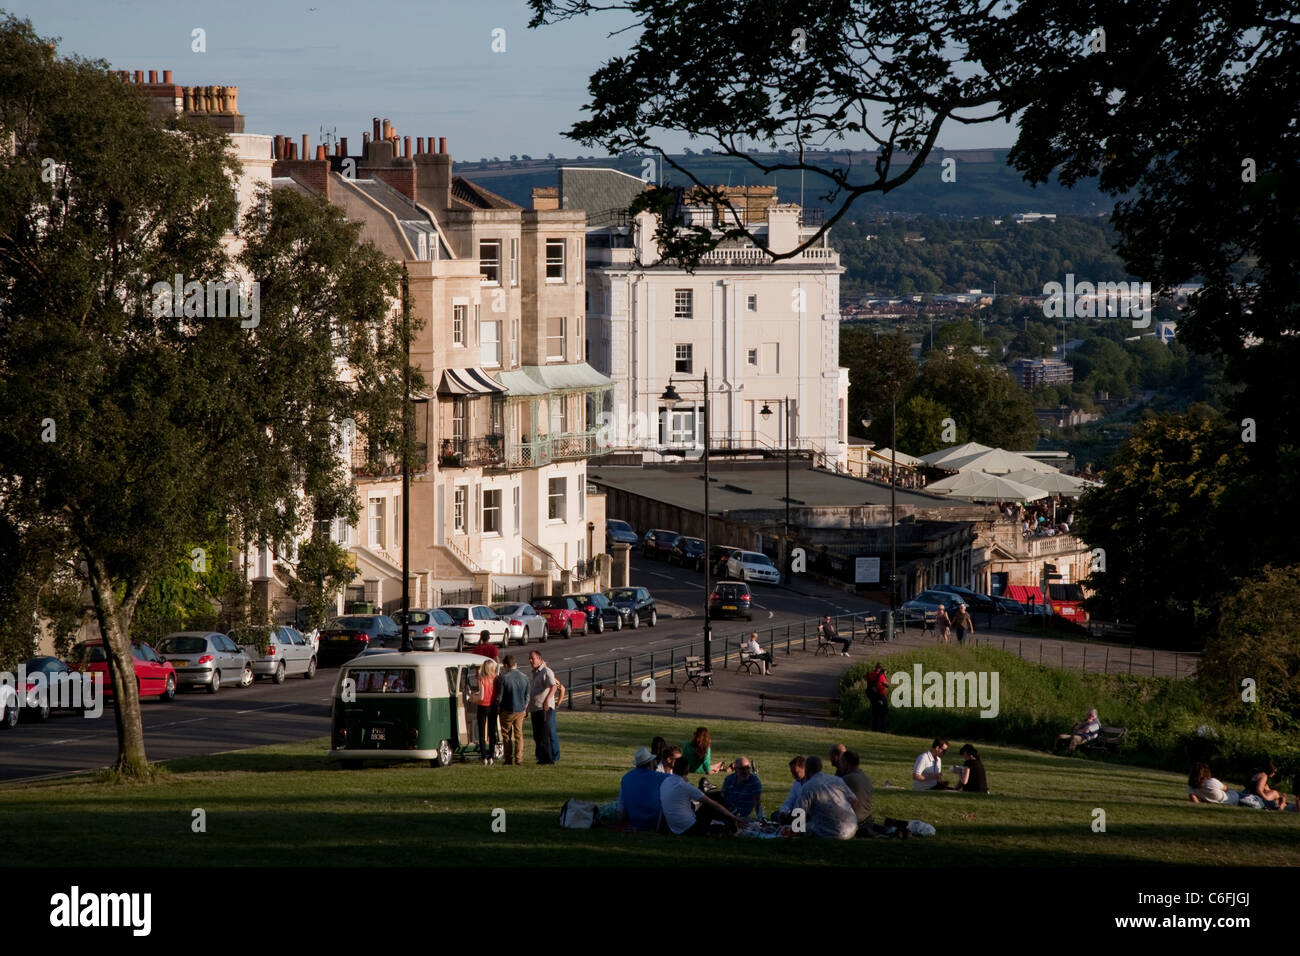 People relaxing next to the Suspension Bridge on Sion Hill, Clifton, Bristol Stock Photo